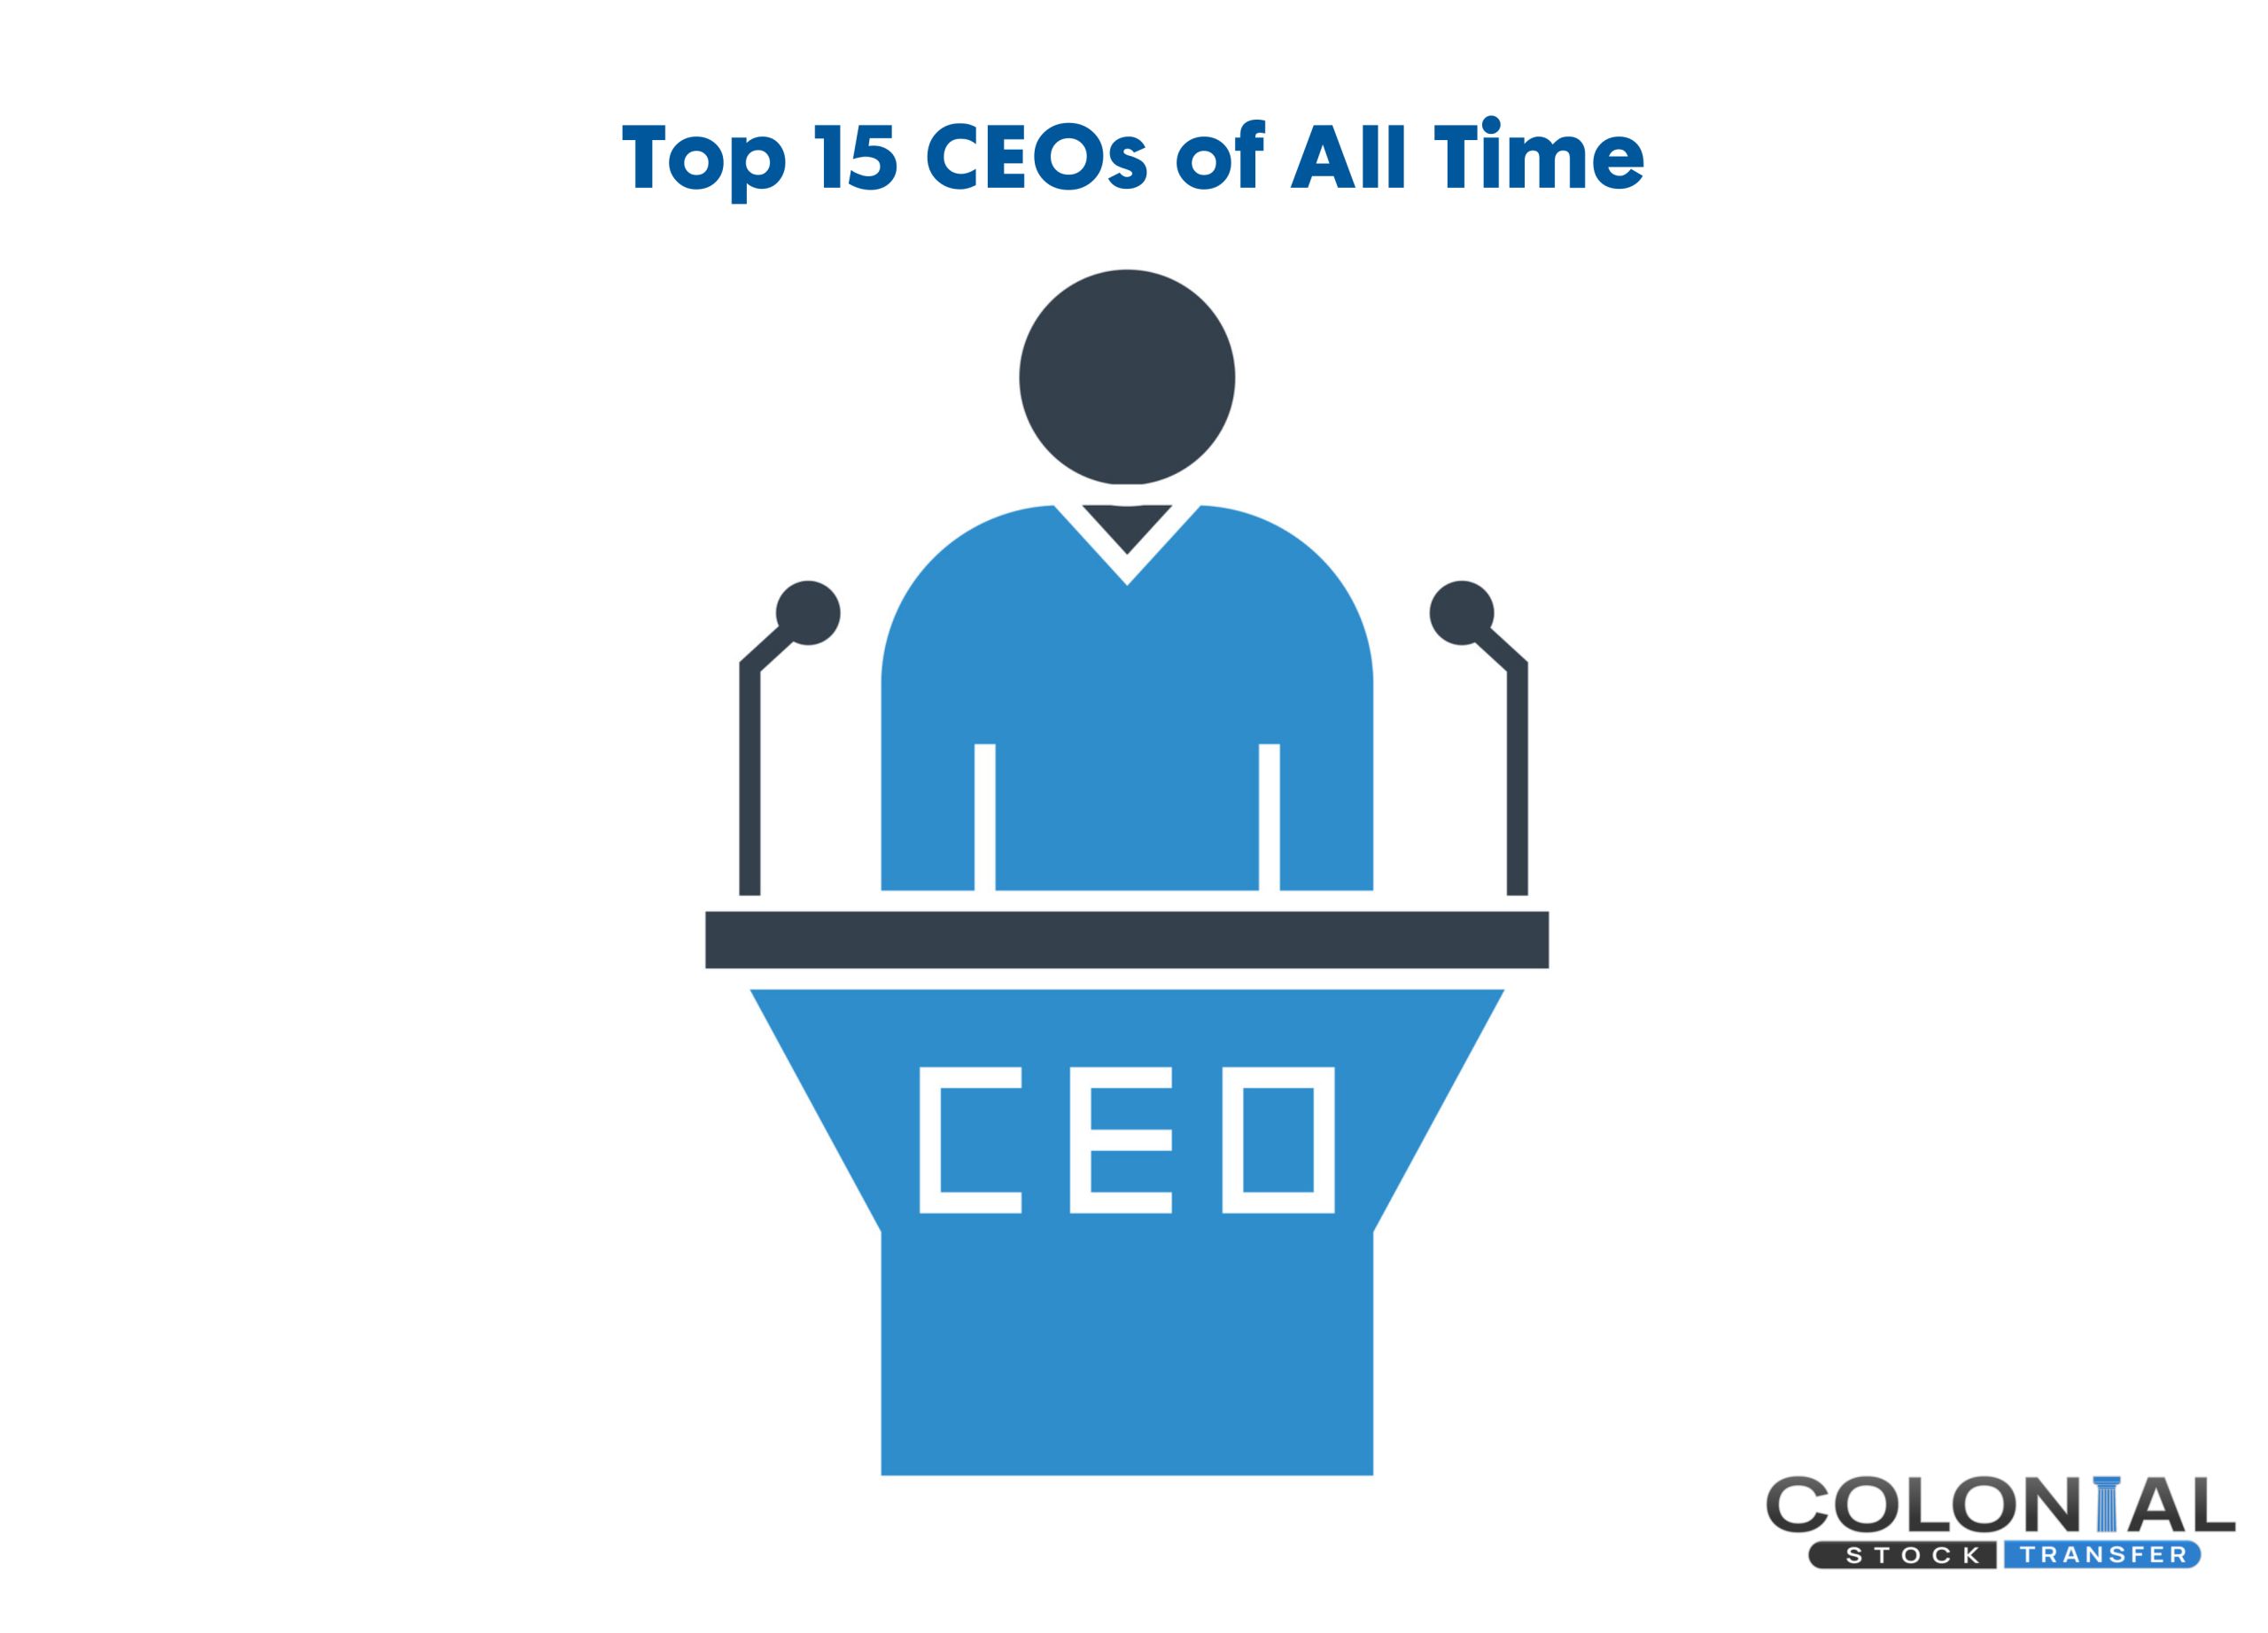 Top 15 CEOs of All Time